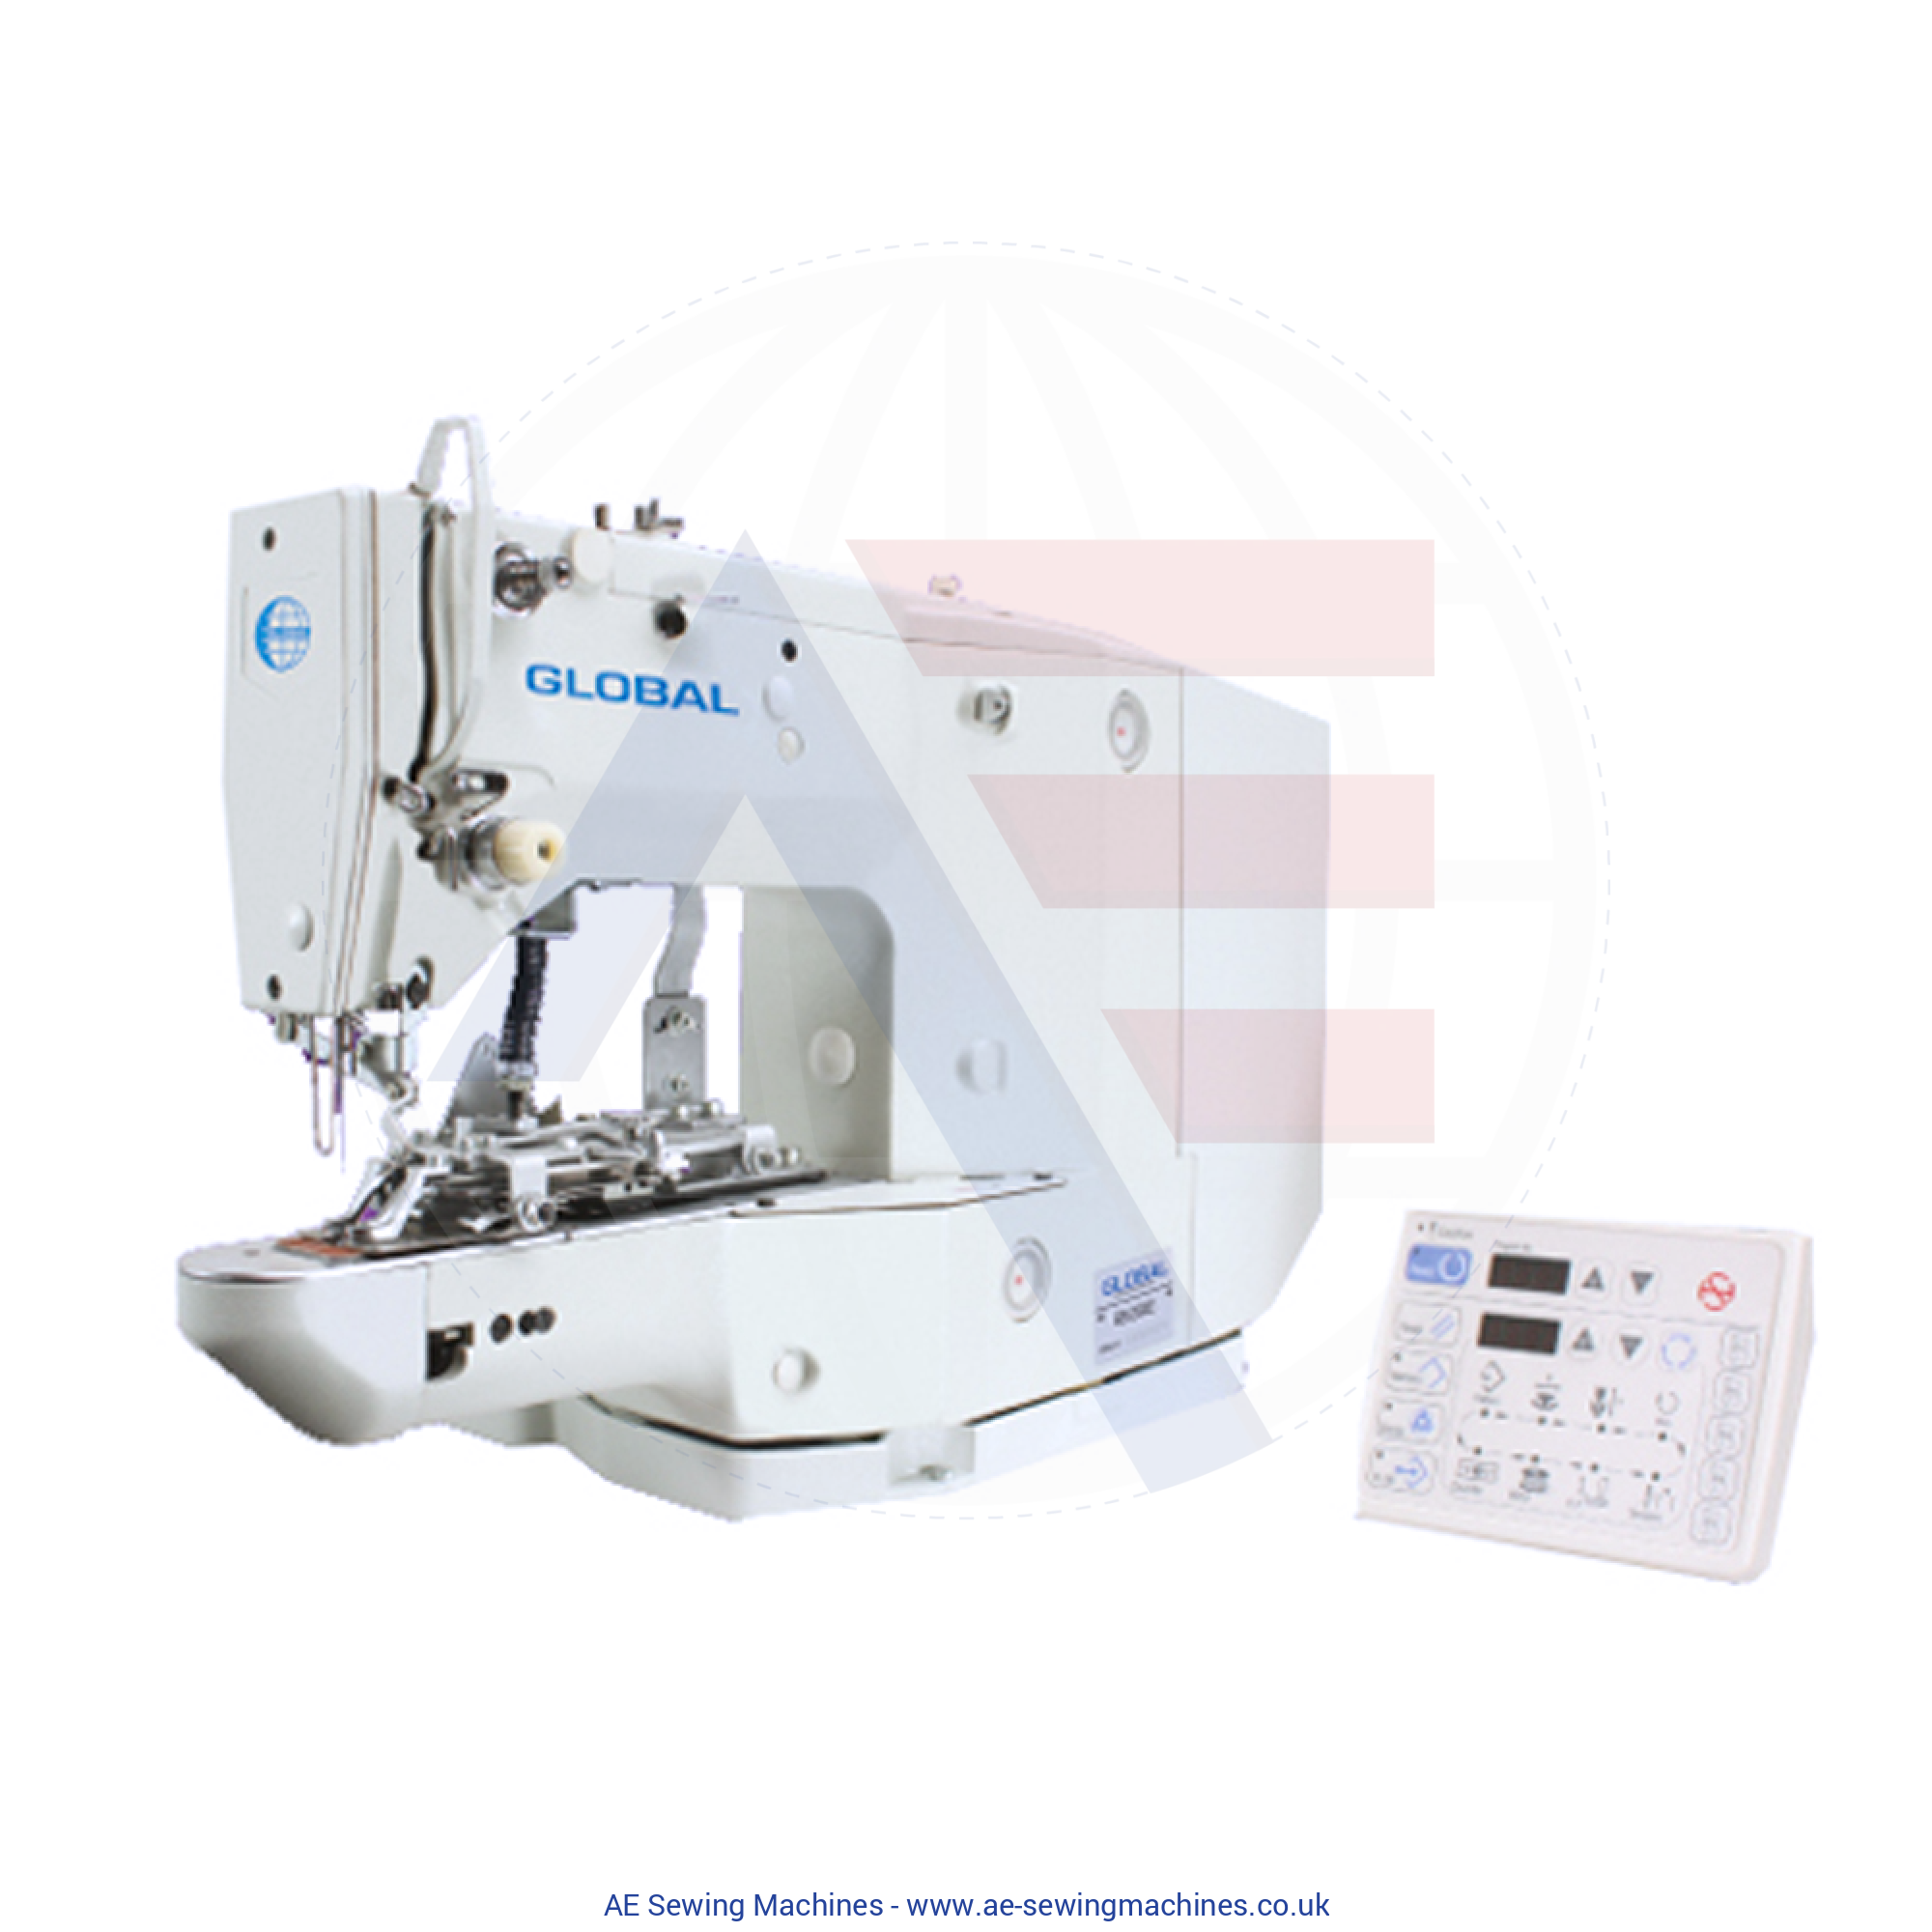 Global Bs 2903 Button Sewer Sewing Machines